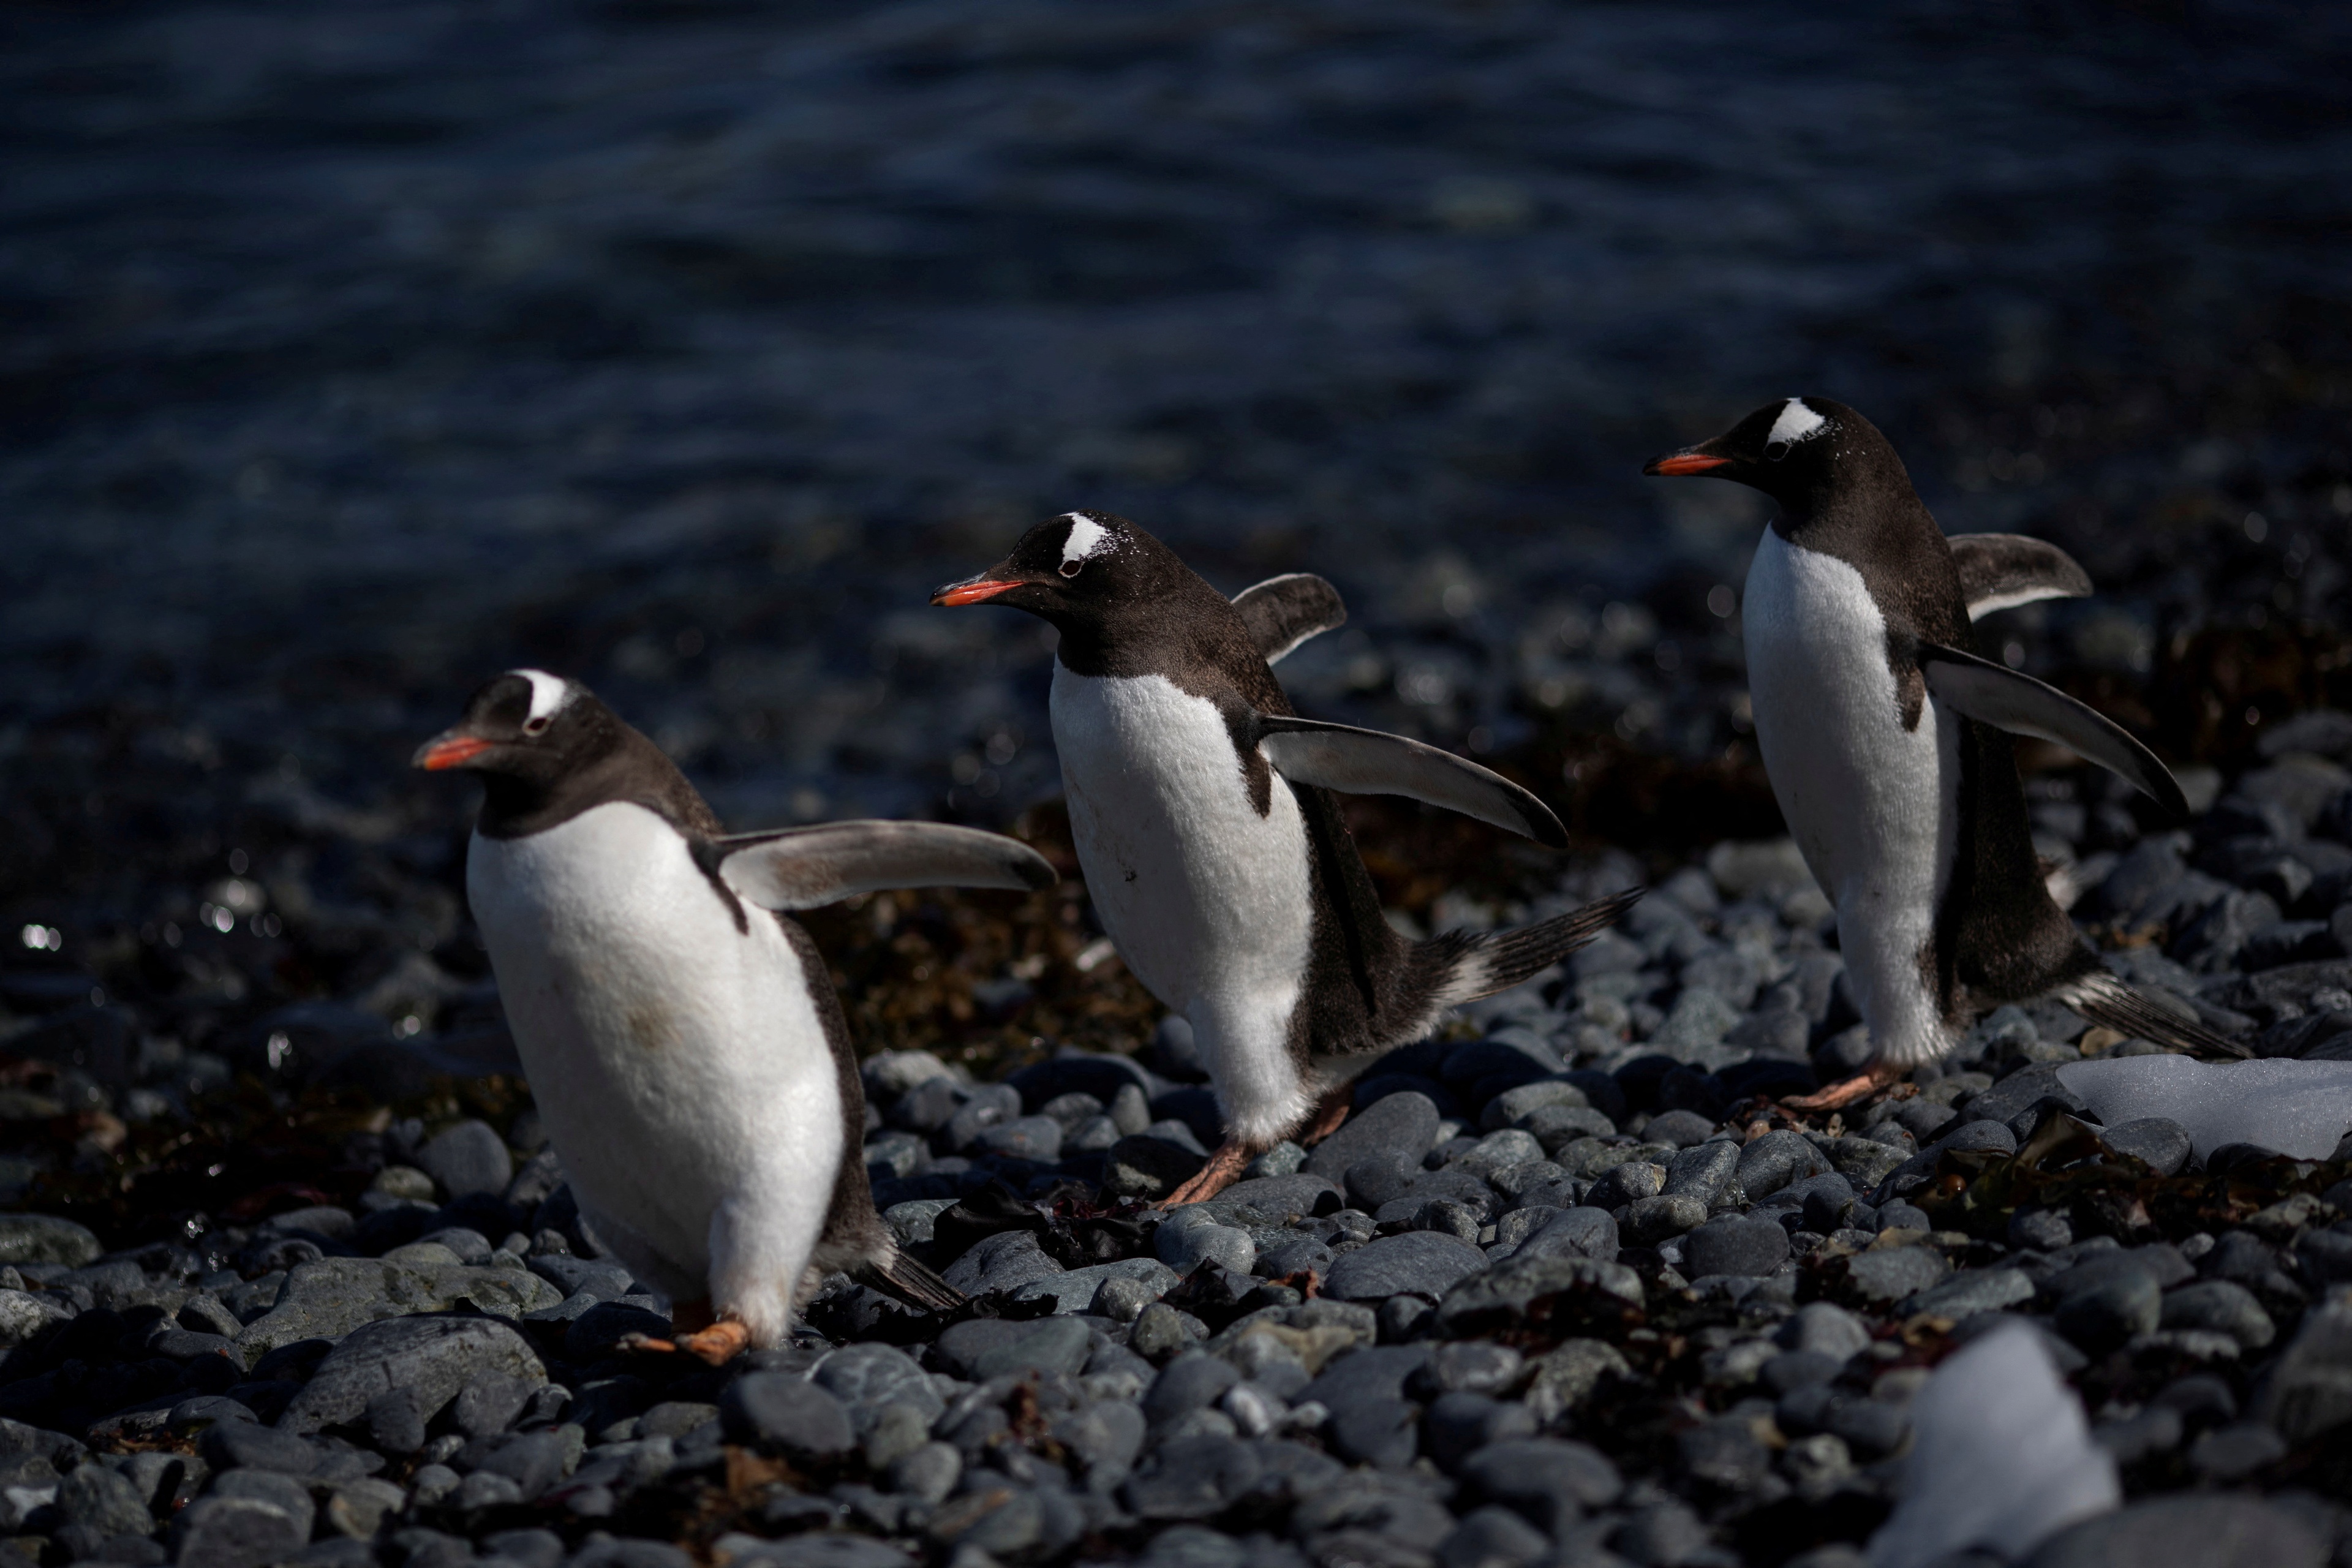 FILE PHOTO: A group of gentoo penguins walk along Quentin Point, Anvers Island, Antarctica, February 4, 2020. REUTERS/Ueslei Marcelino/File Photo